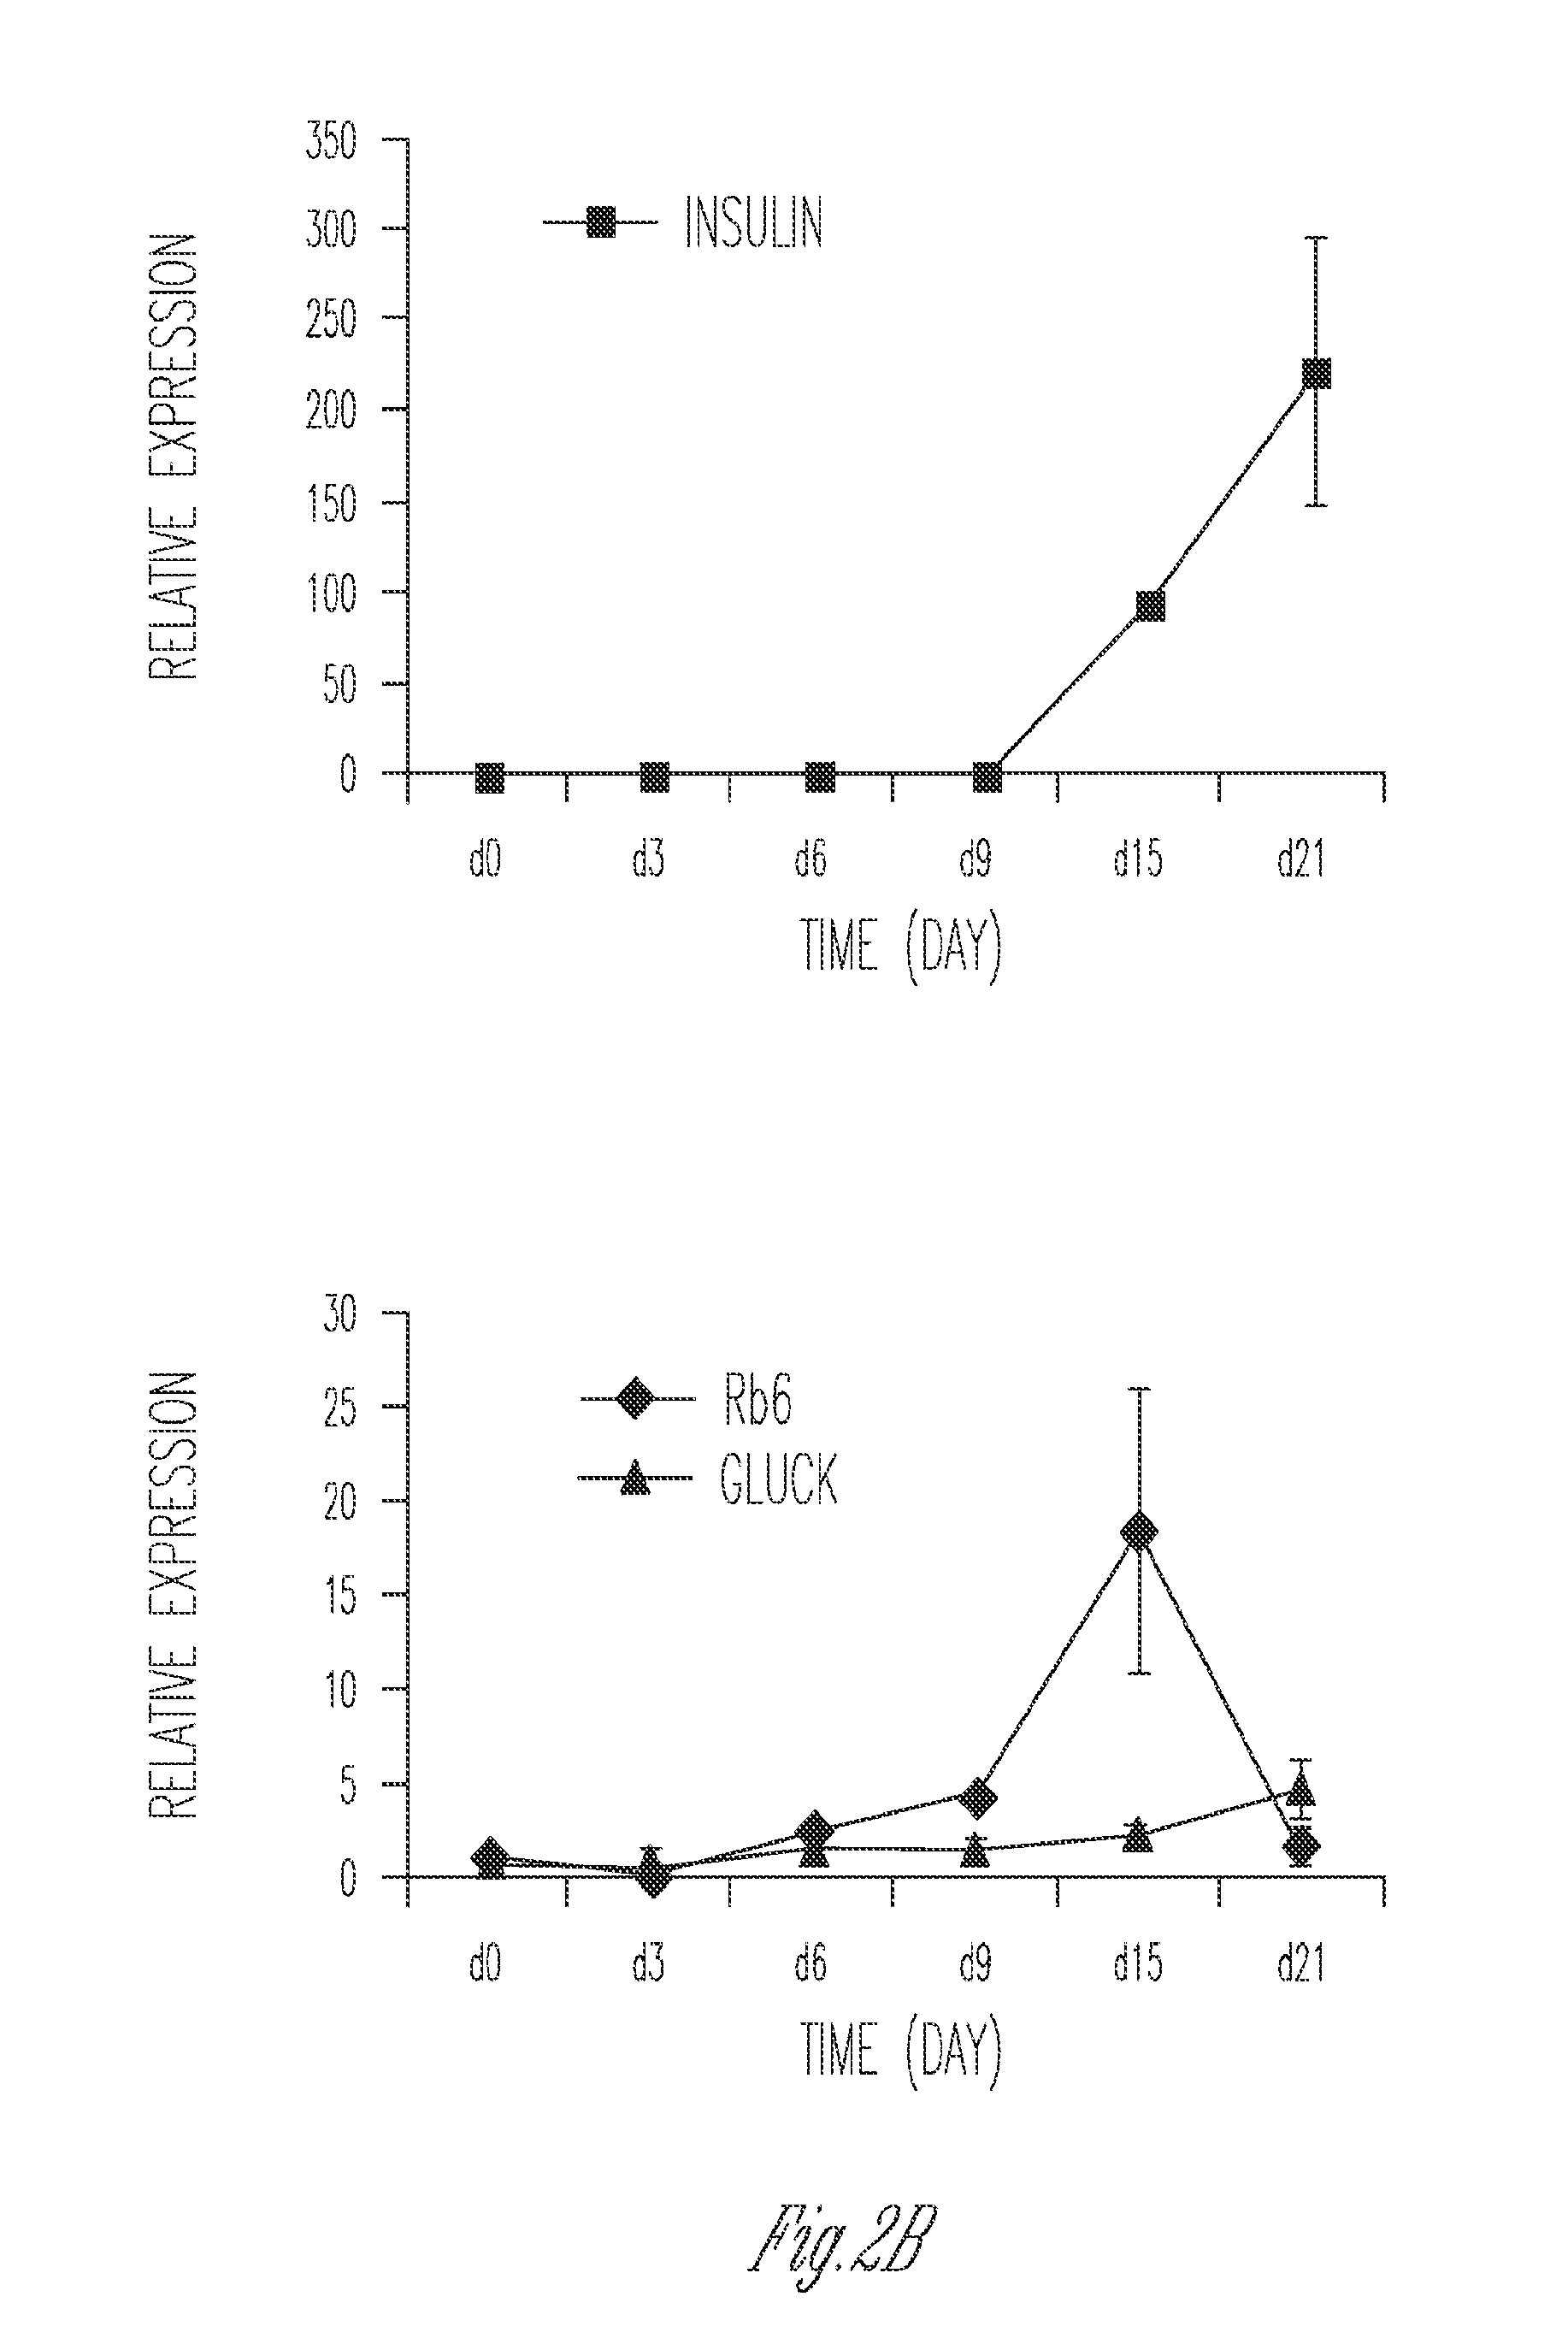 Production of insulin producing cells